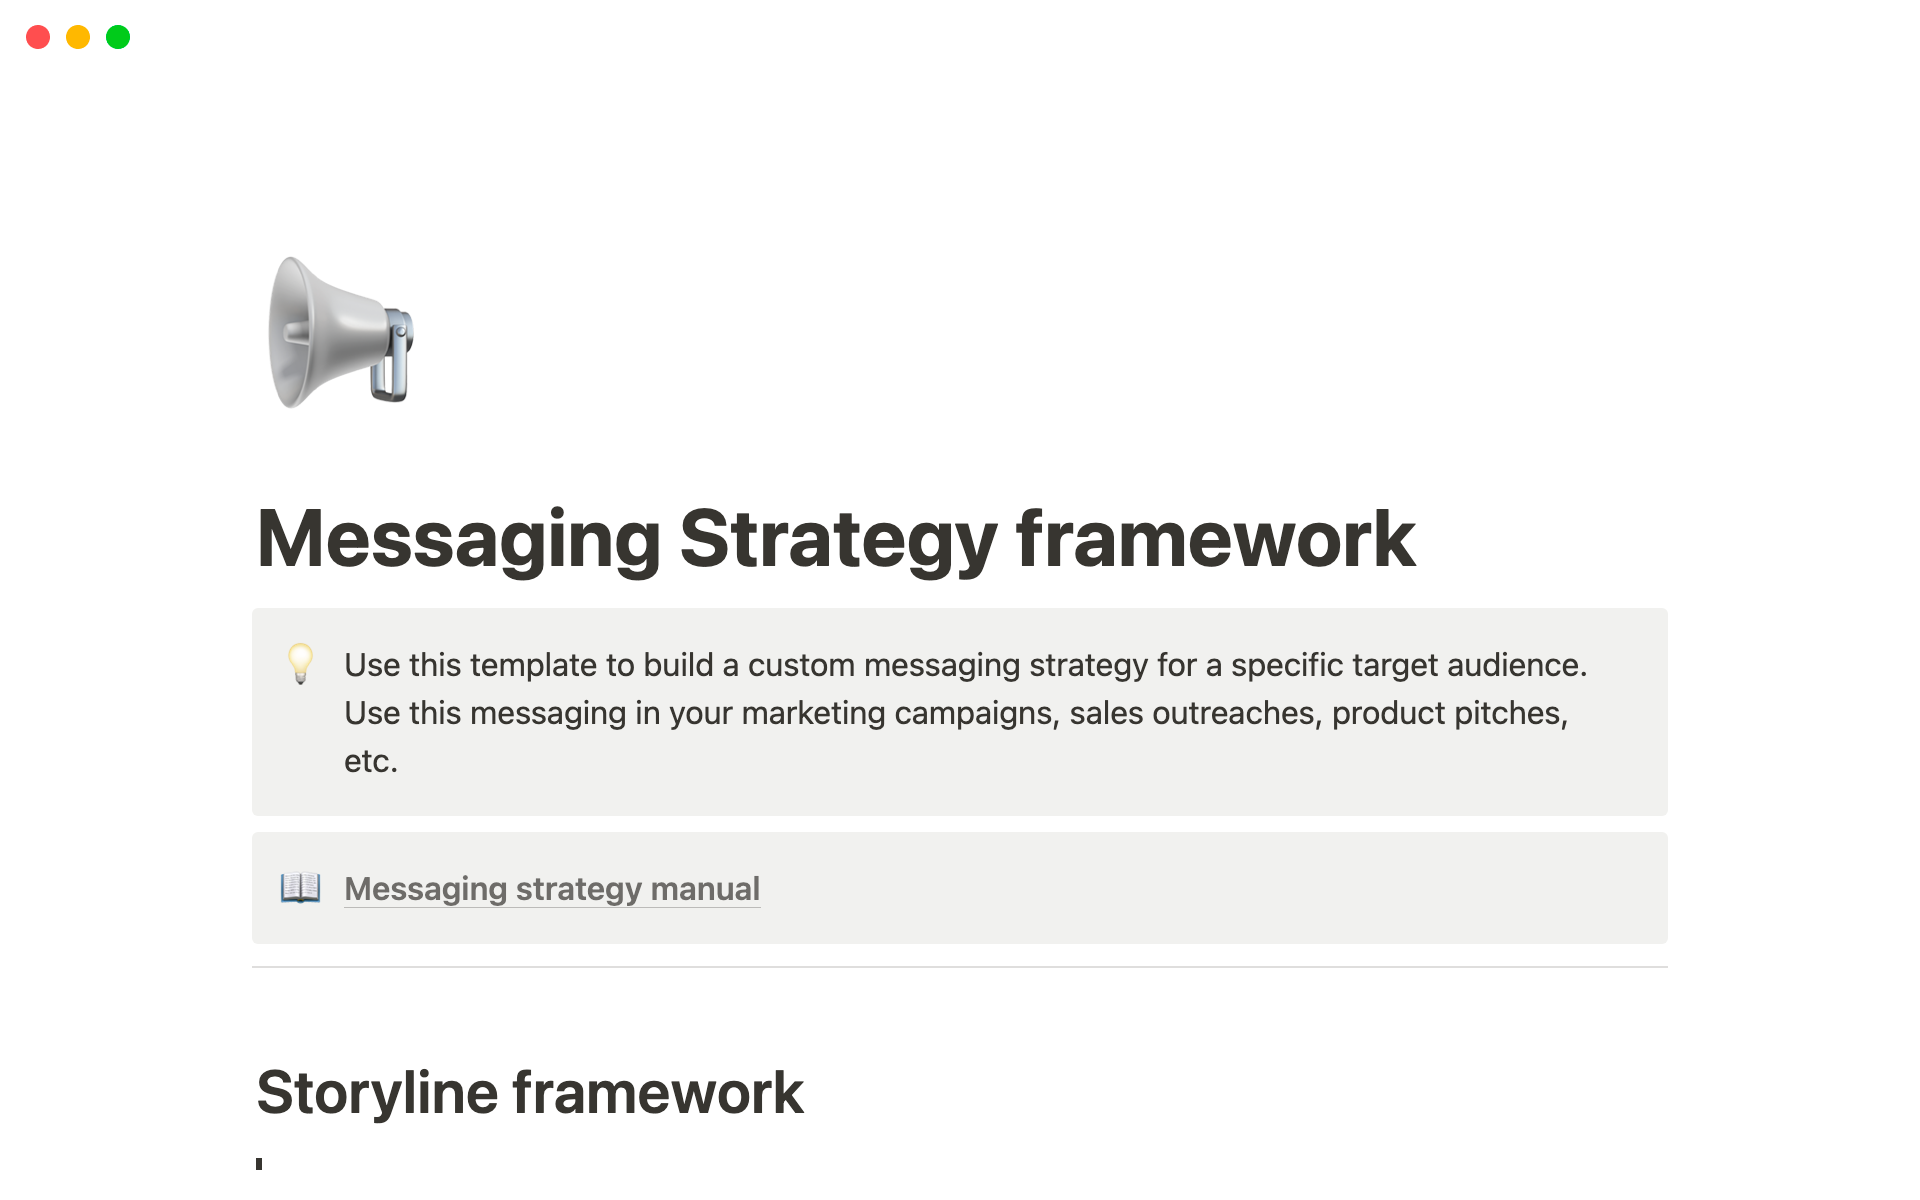 Build a custom messaging strategy for a specific target audience.